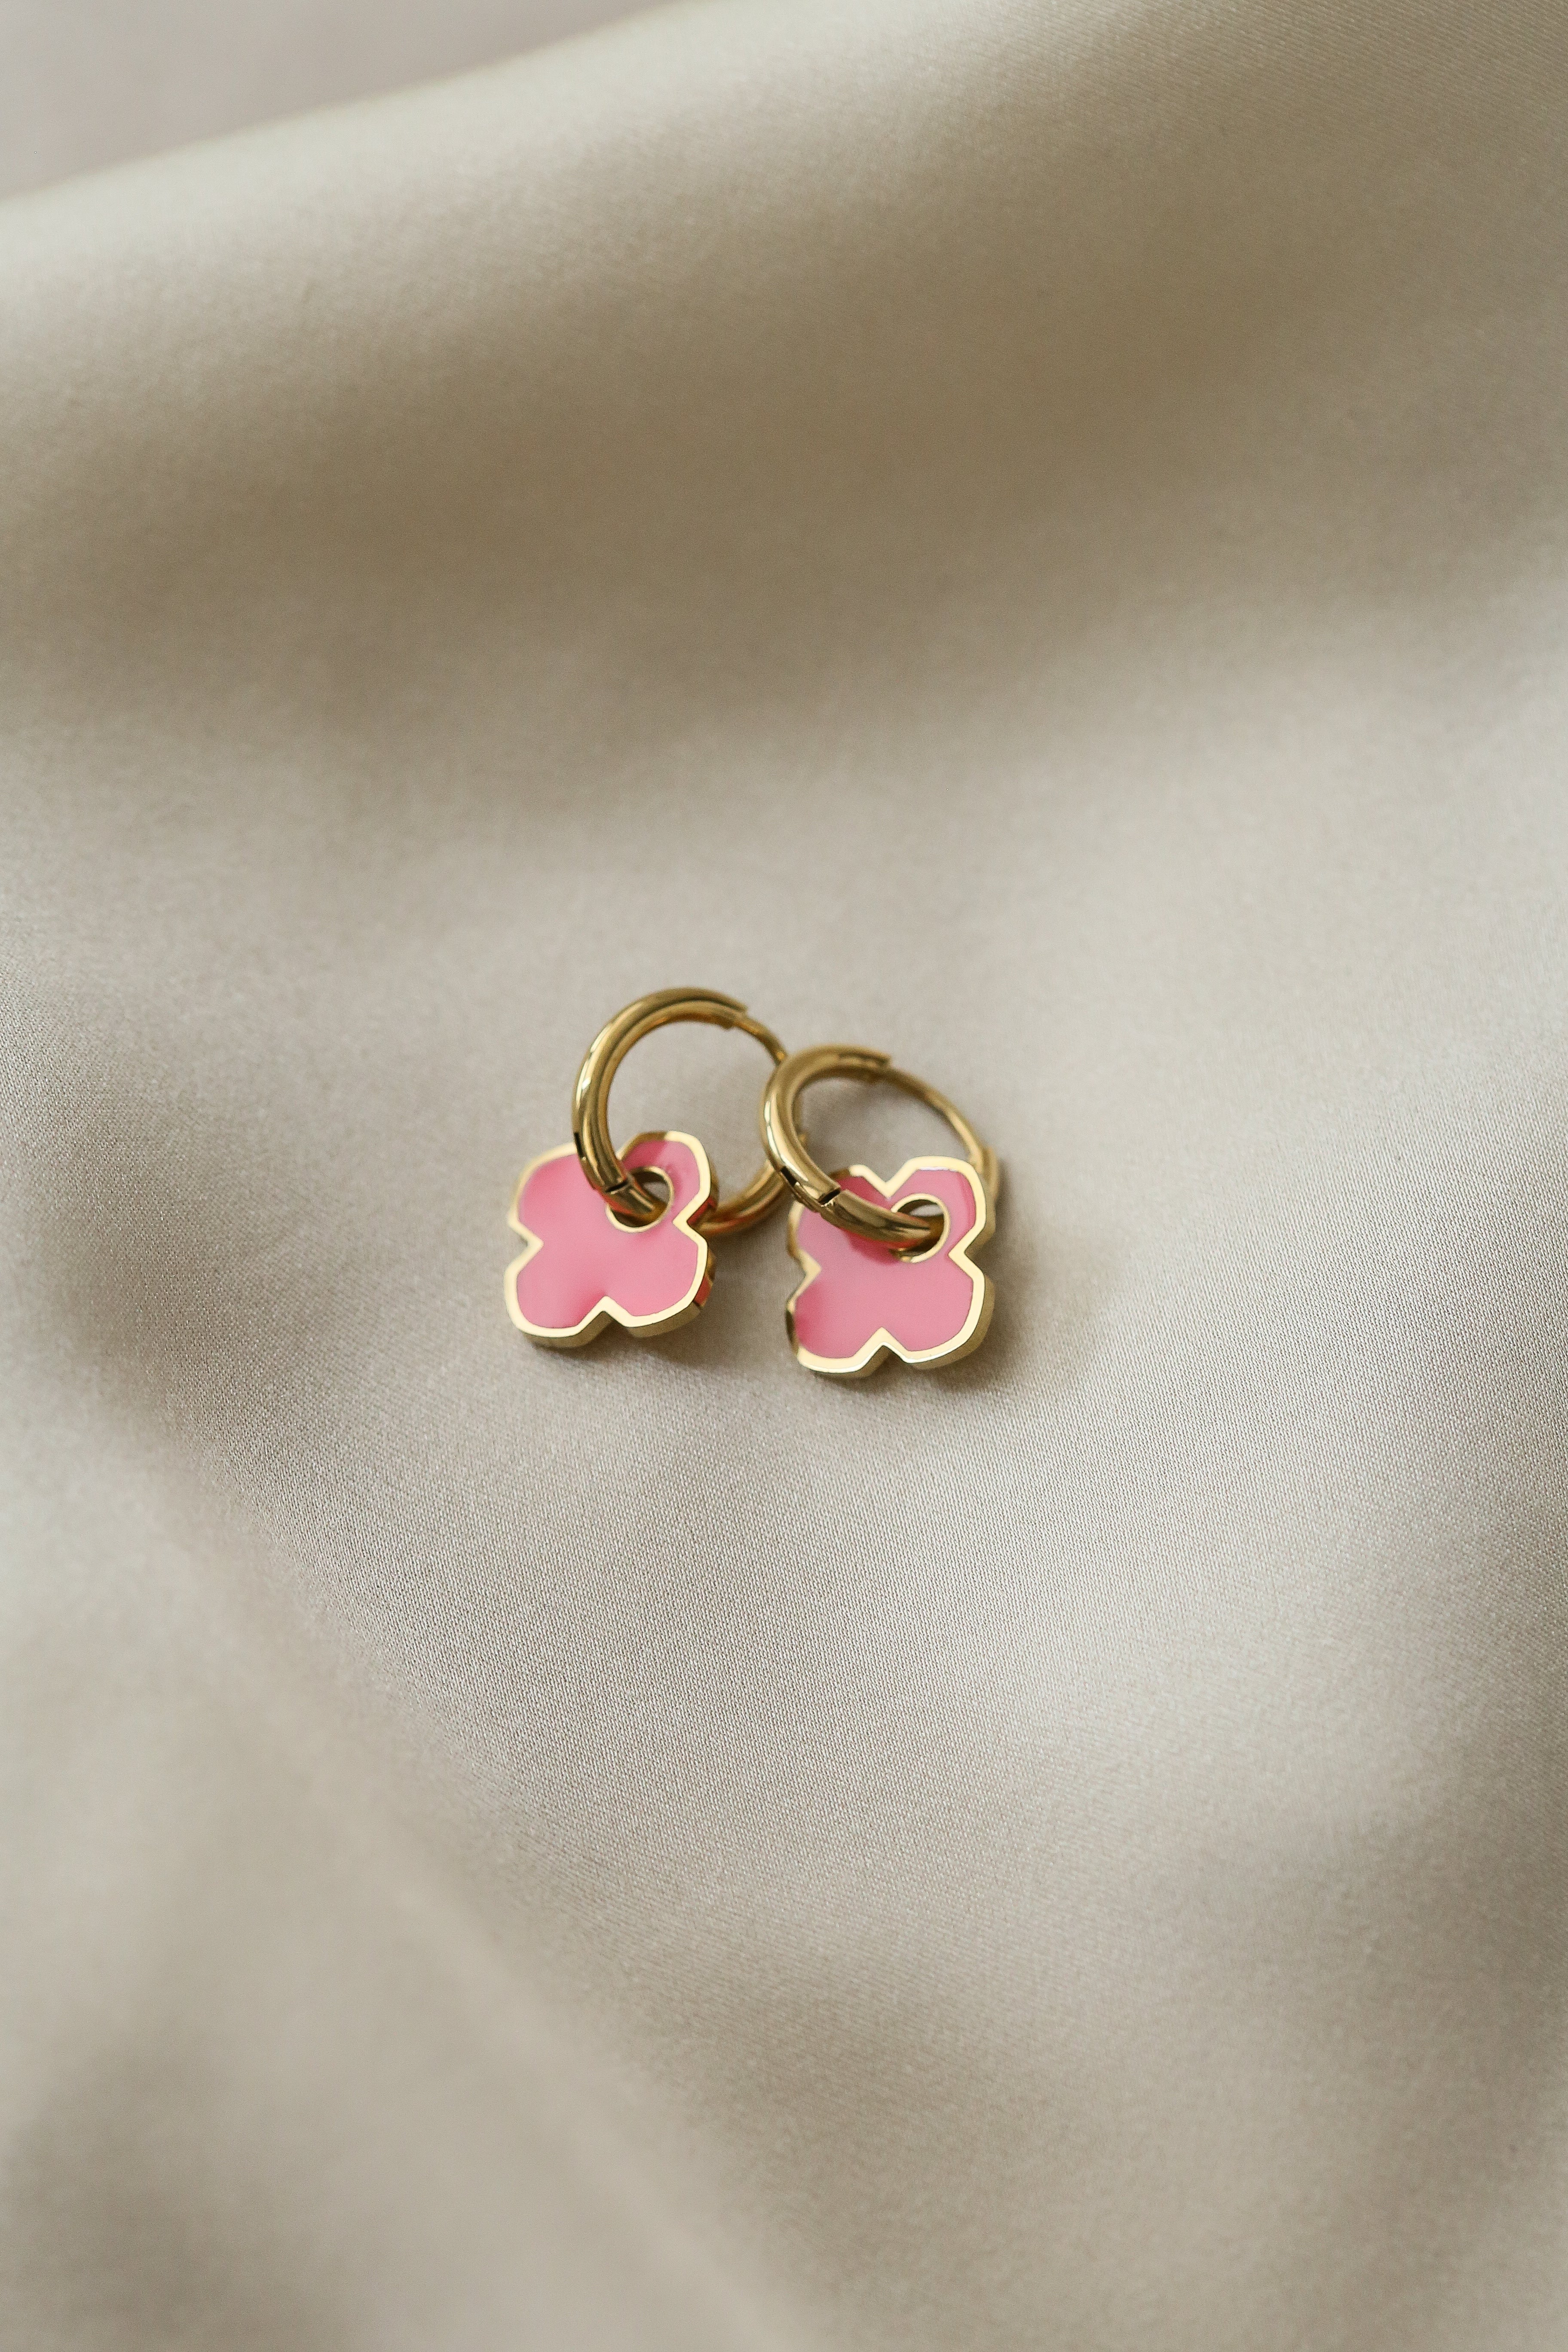 Whitney Earrings - Boutique Minimaliste has waterproof, durable, elegant and vintage inspired jewelry